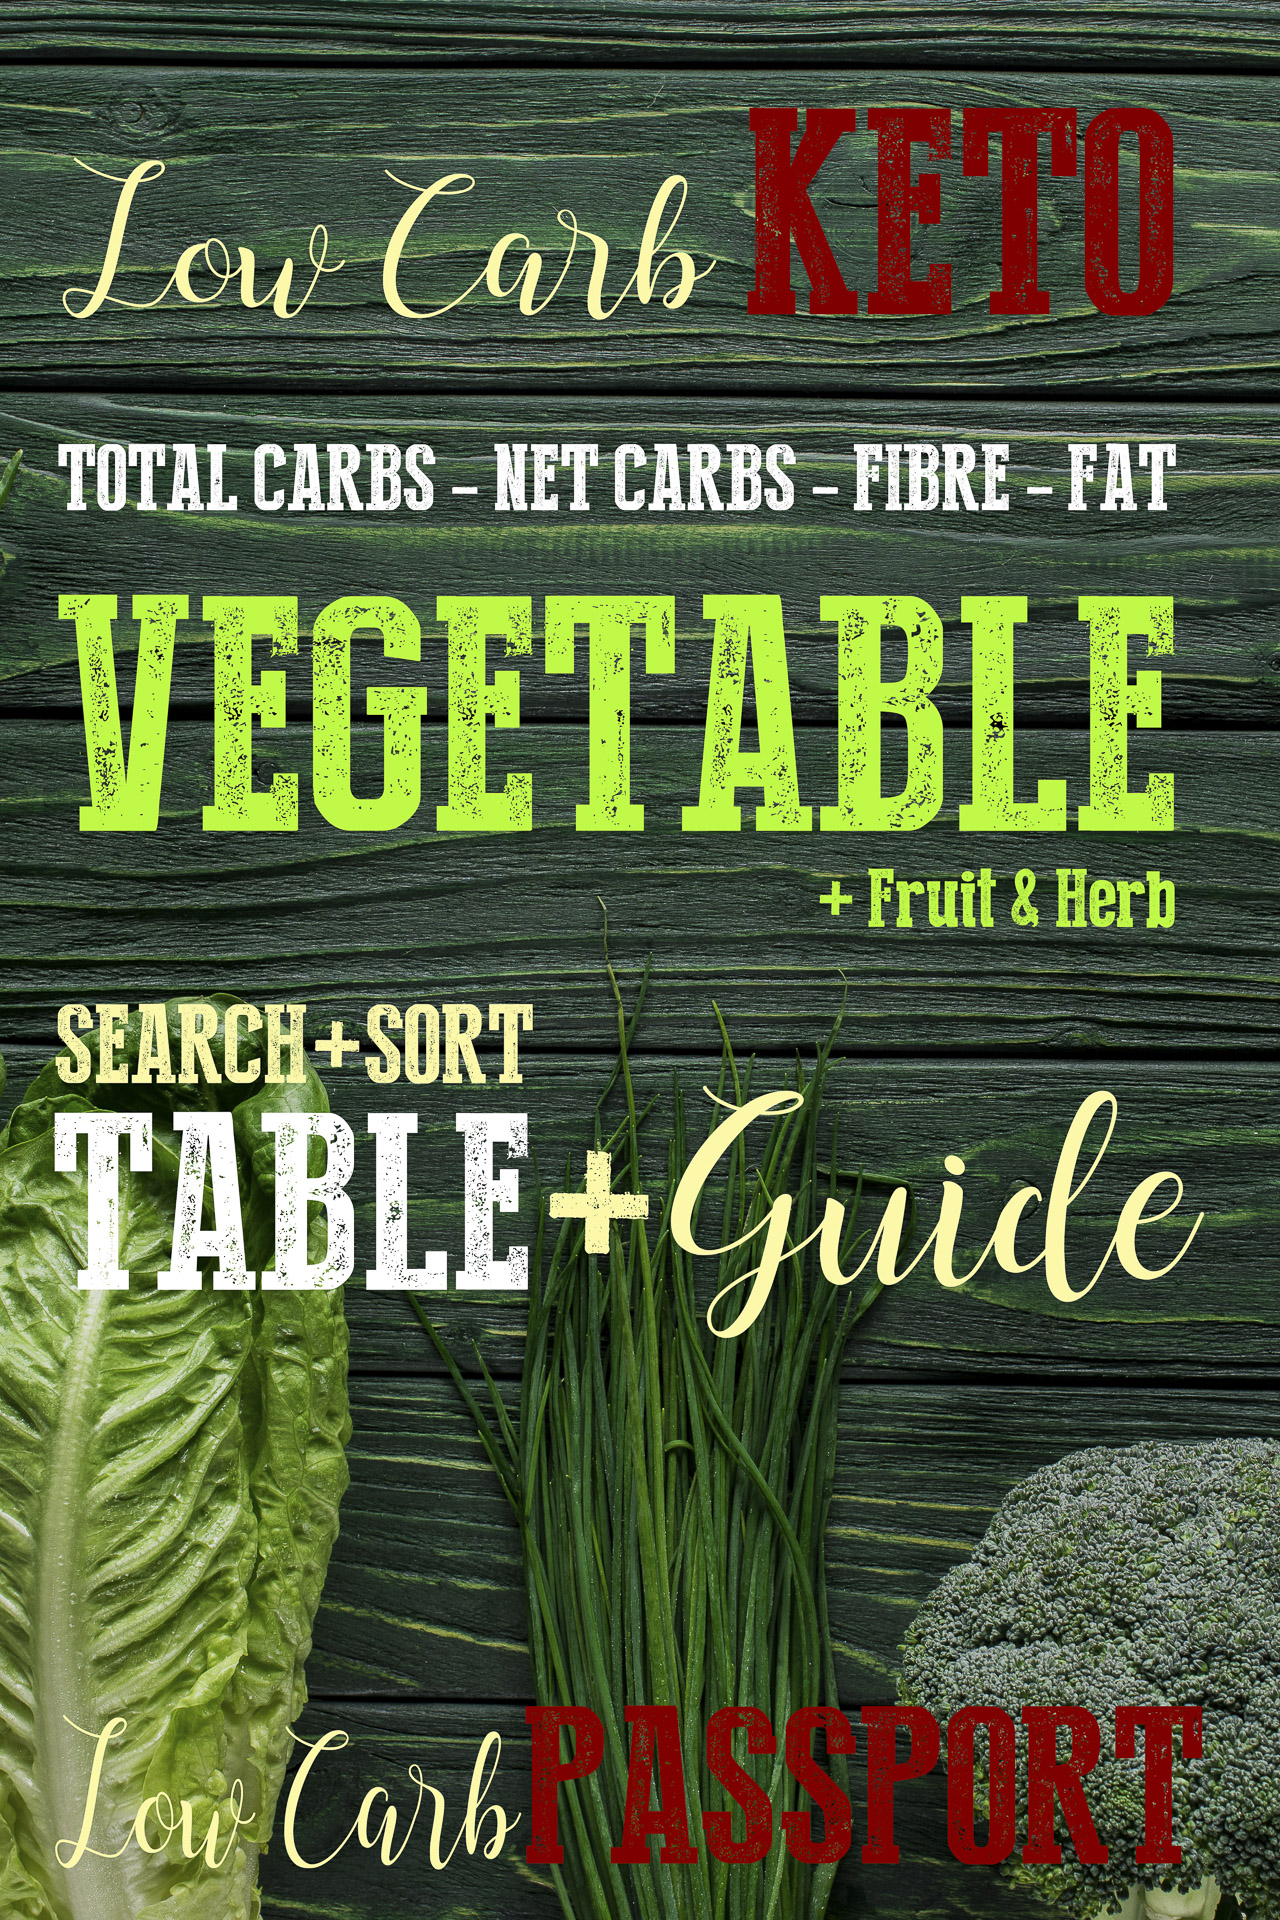 Low-Carb Keto Vegetable Guide and Table. Search by carbs, net carbs, fat or fibre